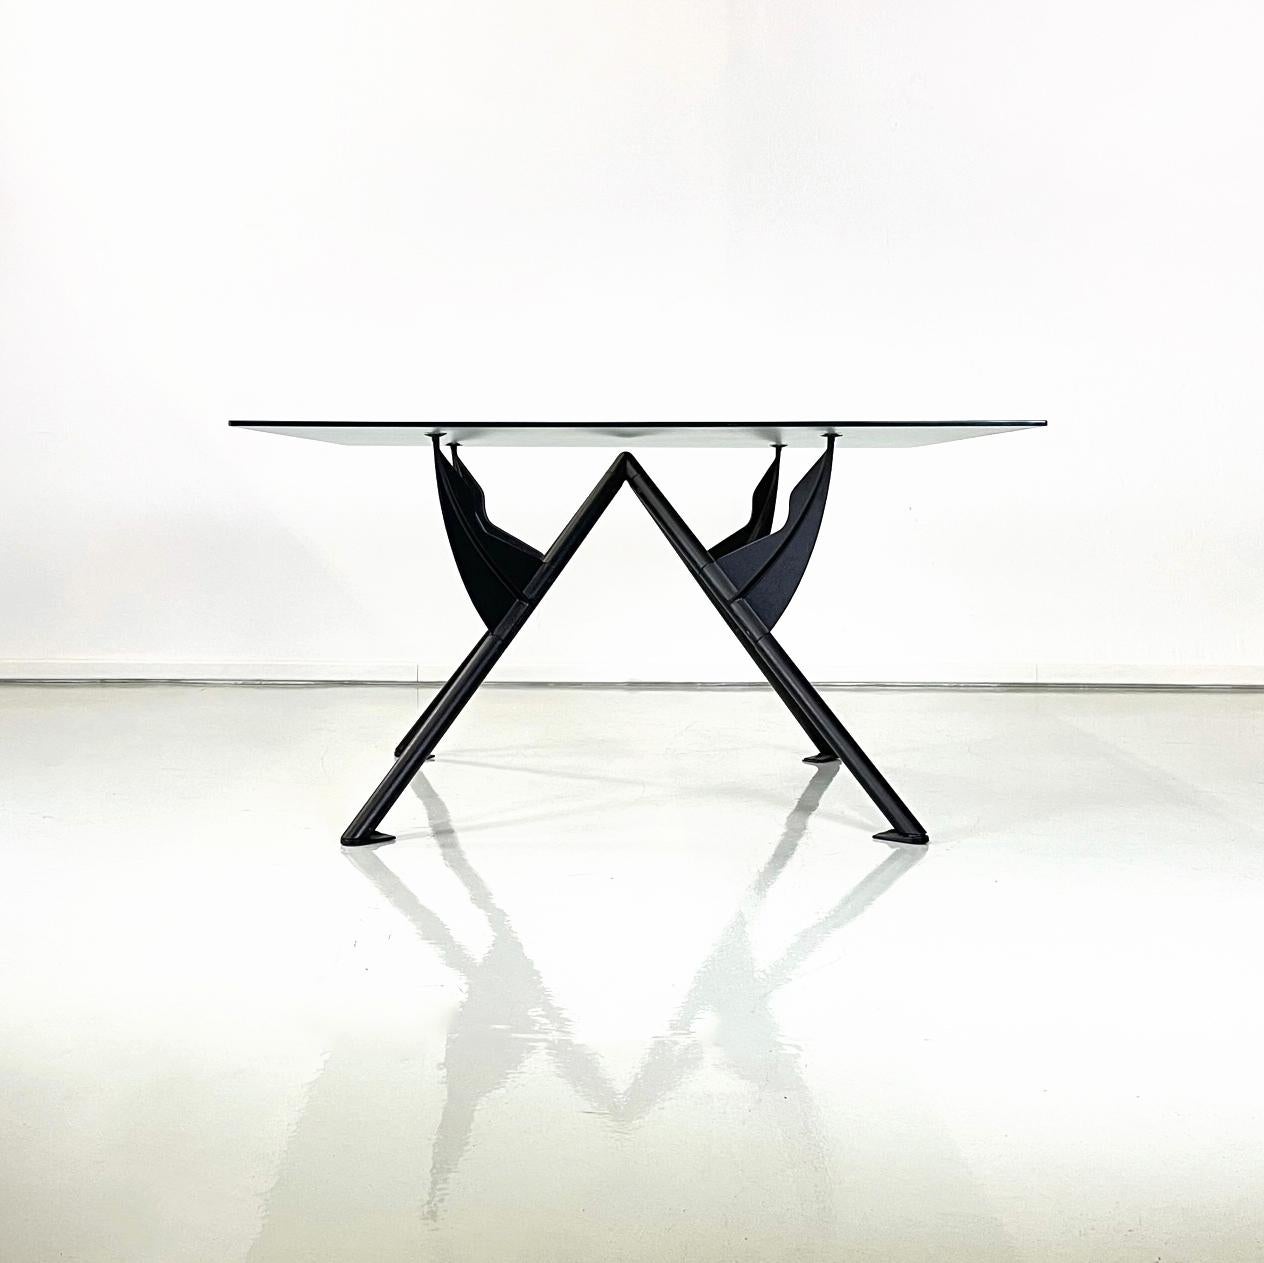 Italian modern glass and metal Dining table mod. President by Philippe Starck for Baleri Italia, 1984
Dining table mod. President with square glass top and black painted metal structure. The top has a glossy and smooth finish on the upper part and